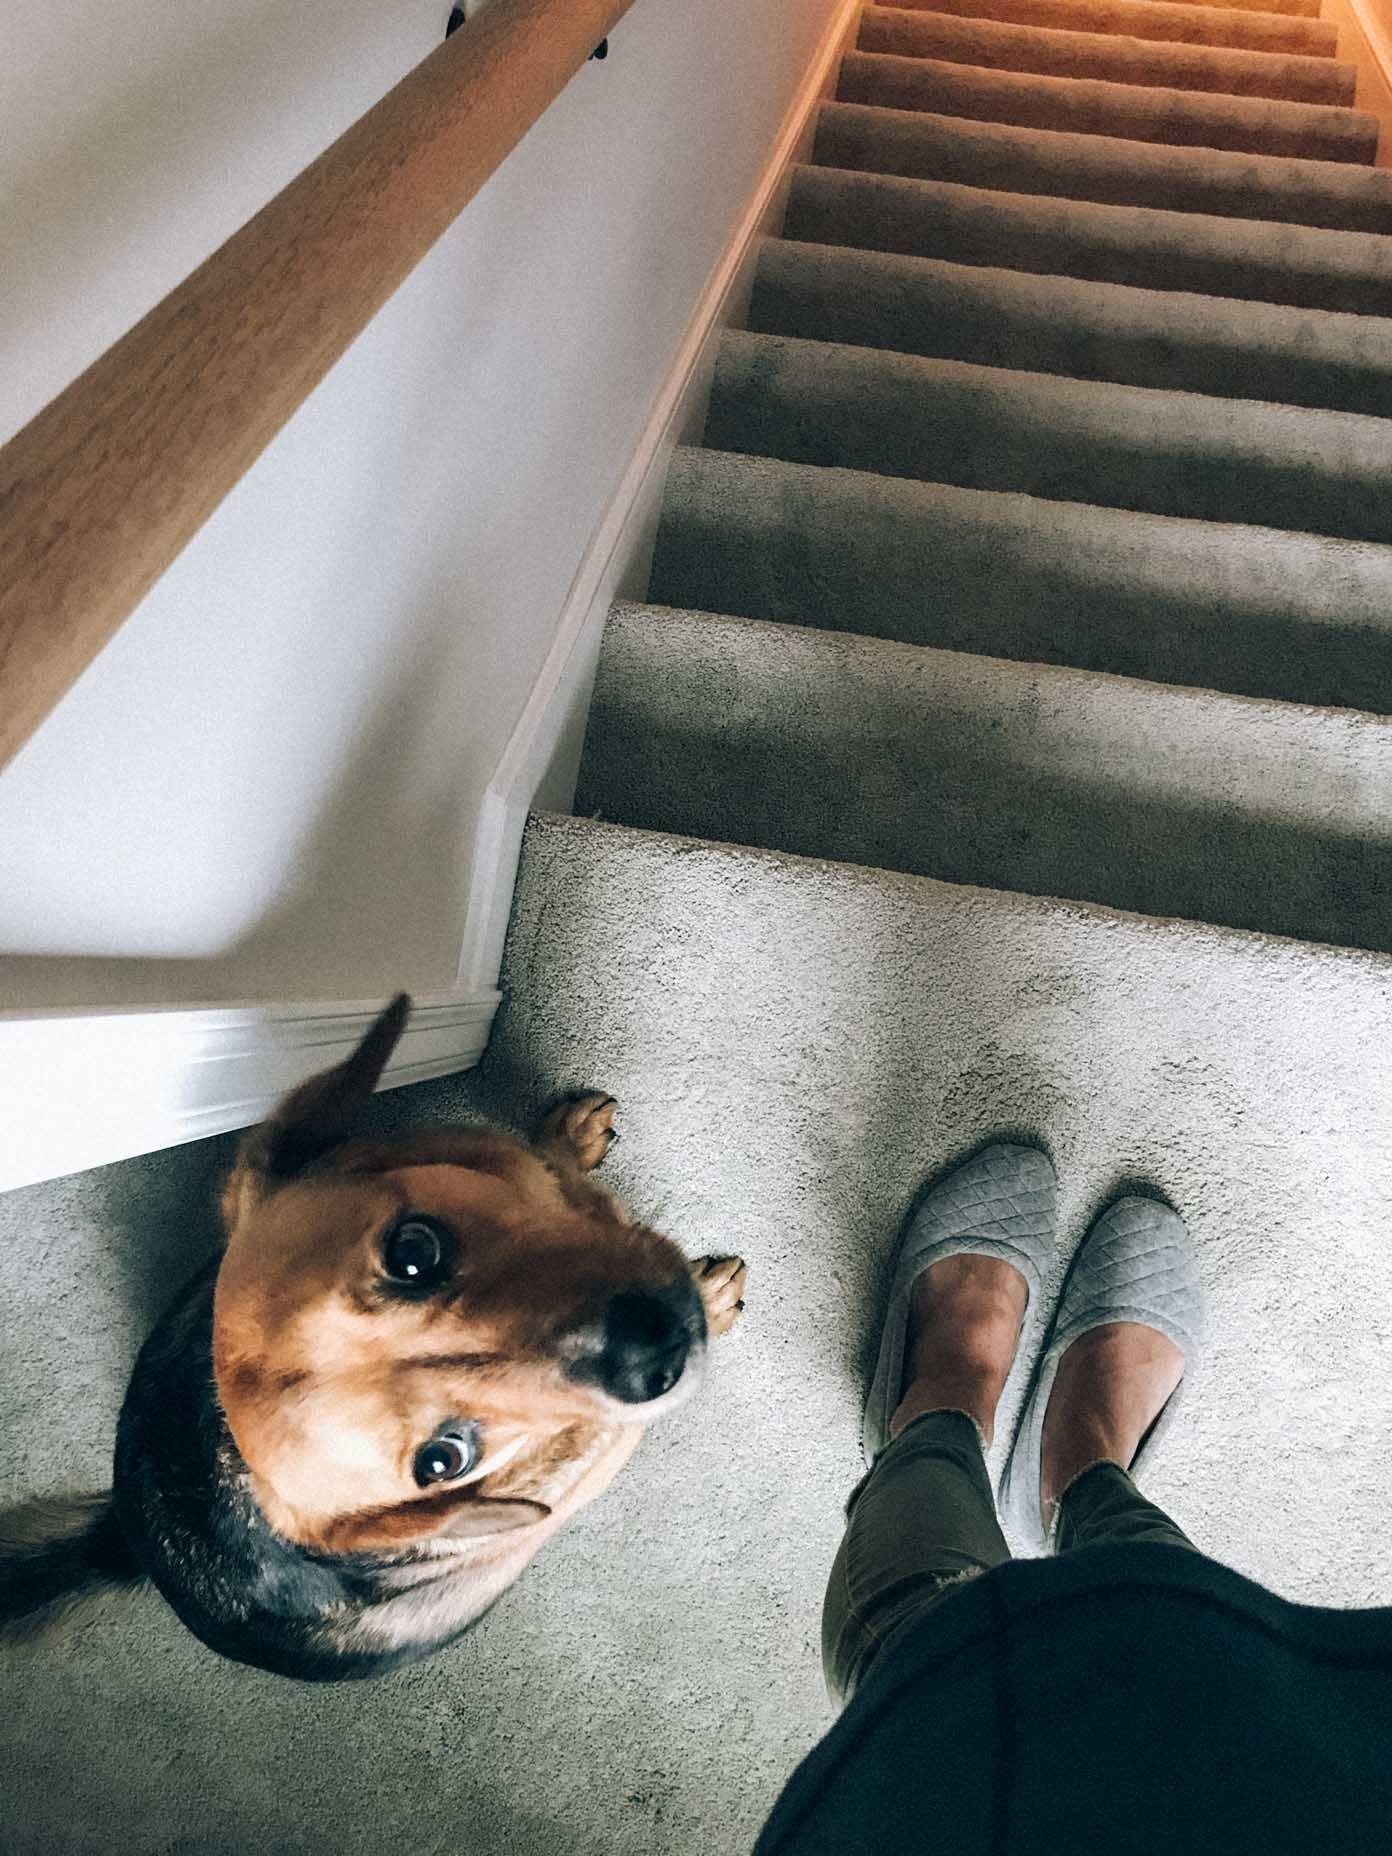 A dog at the top of the stairs staring at its owner.